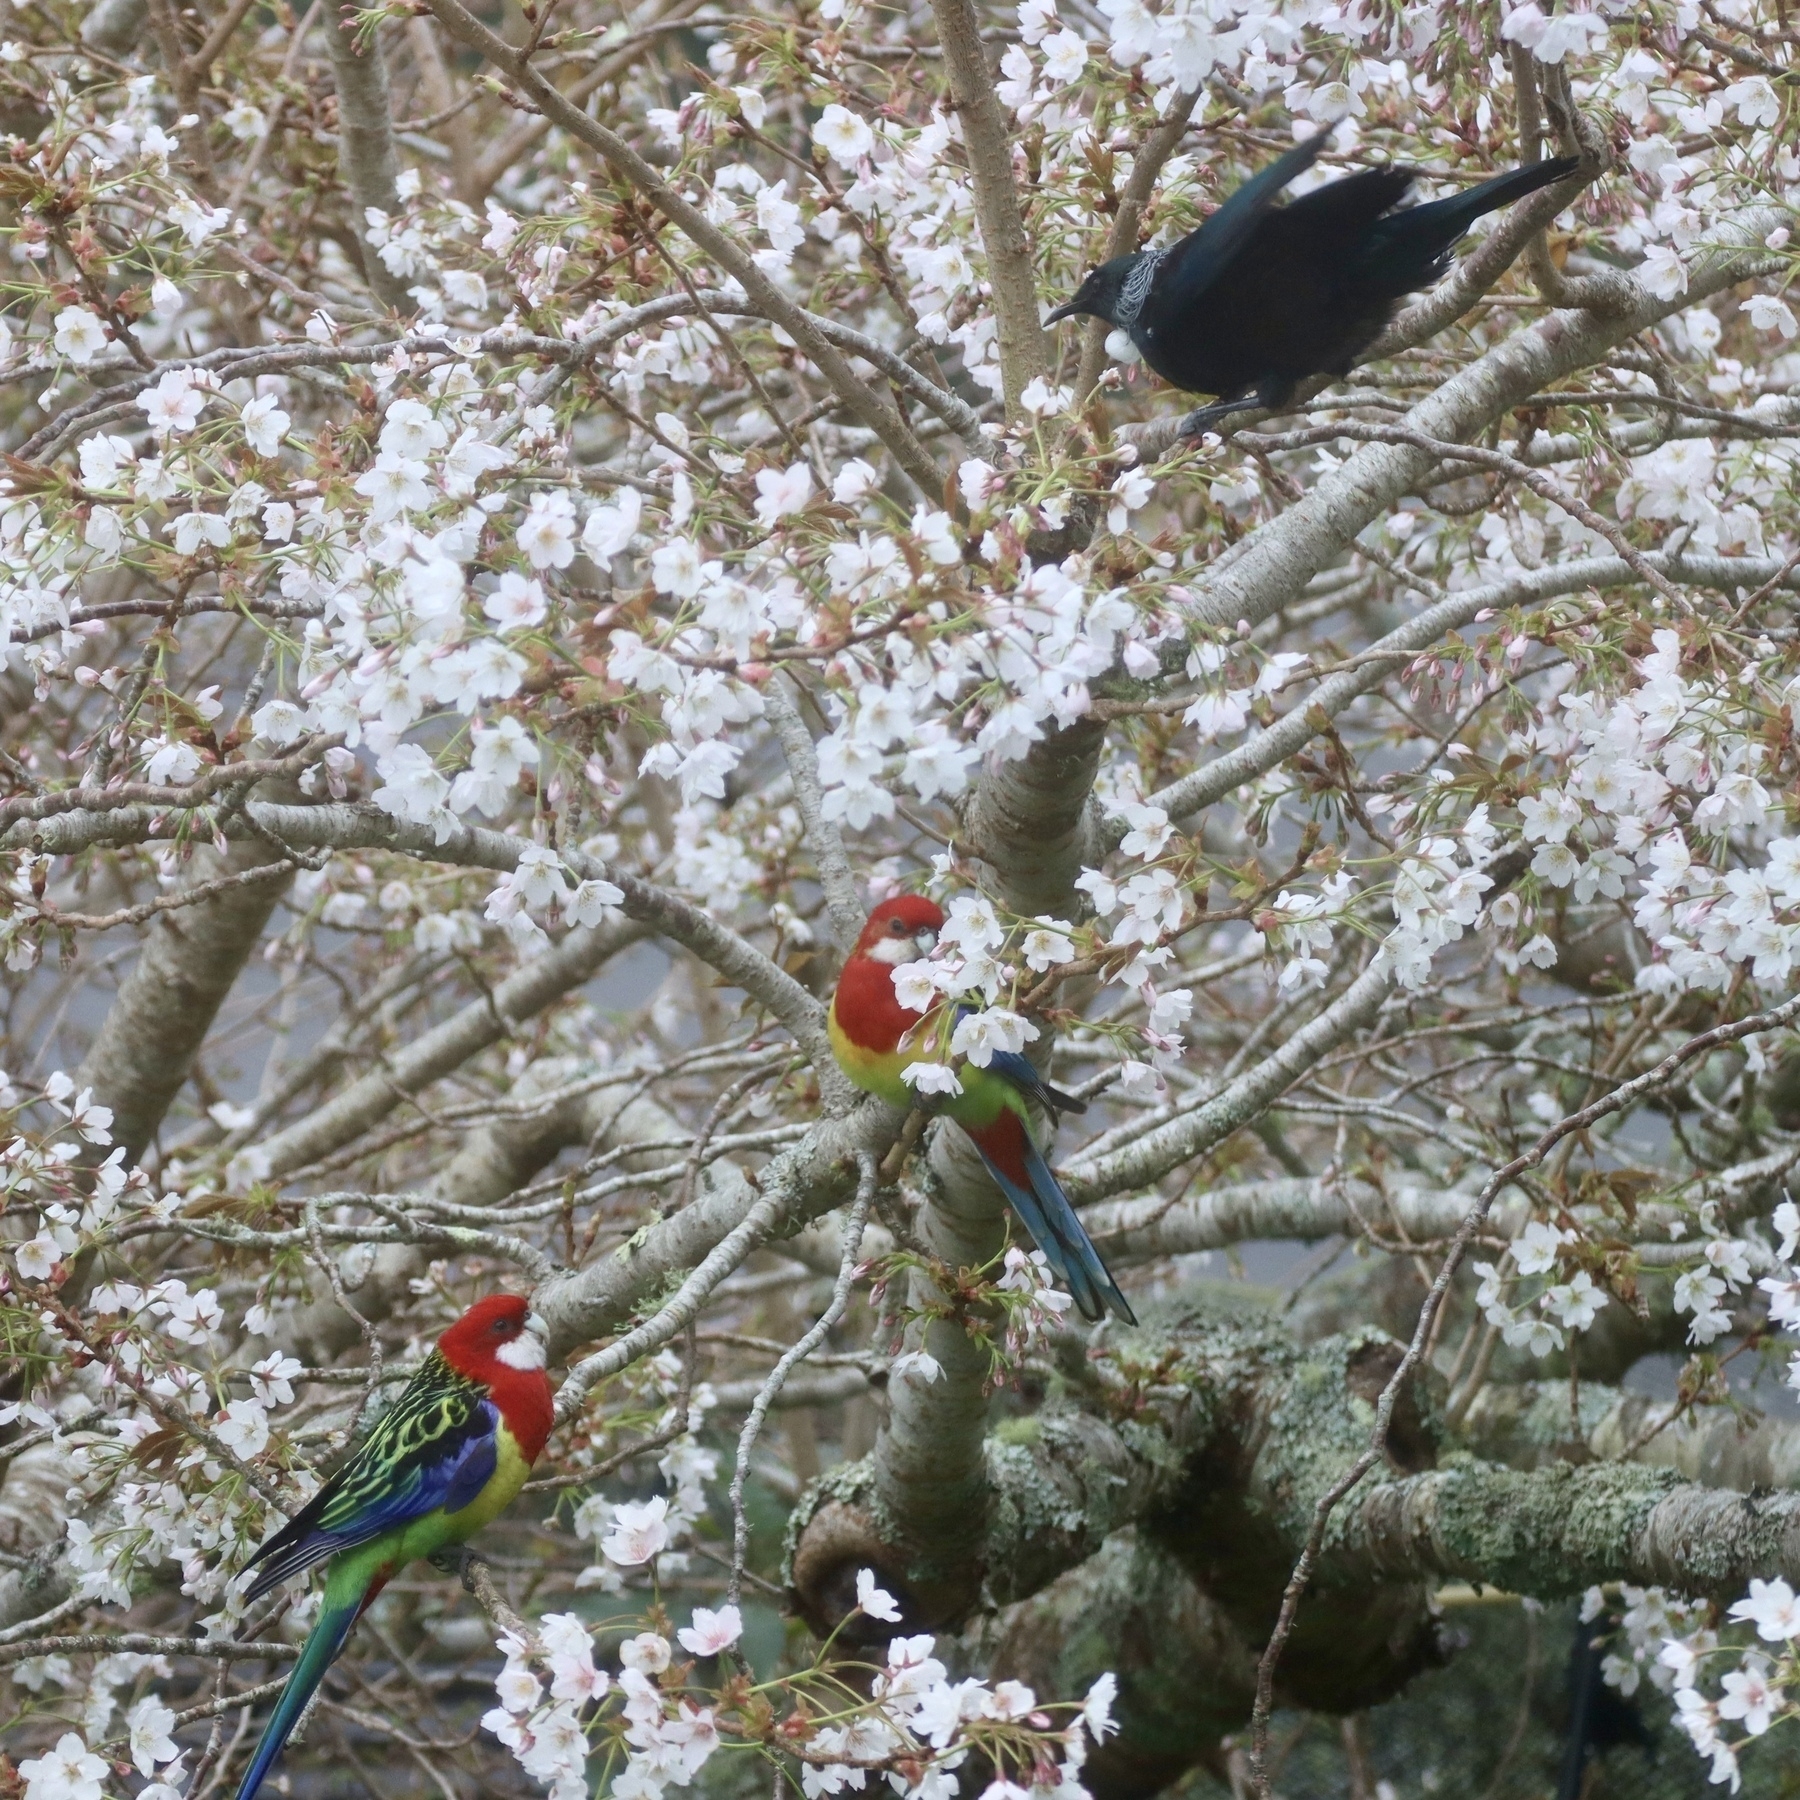 In a flowering cherry in blossom a tūī menaces a pair of colourful parrots (rosella).